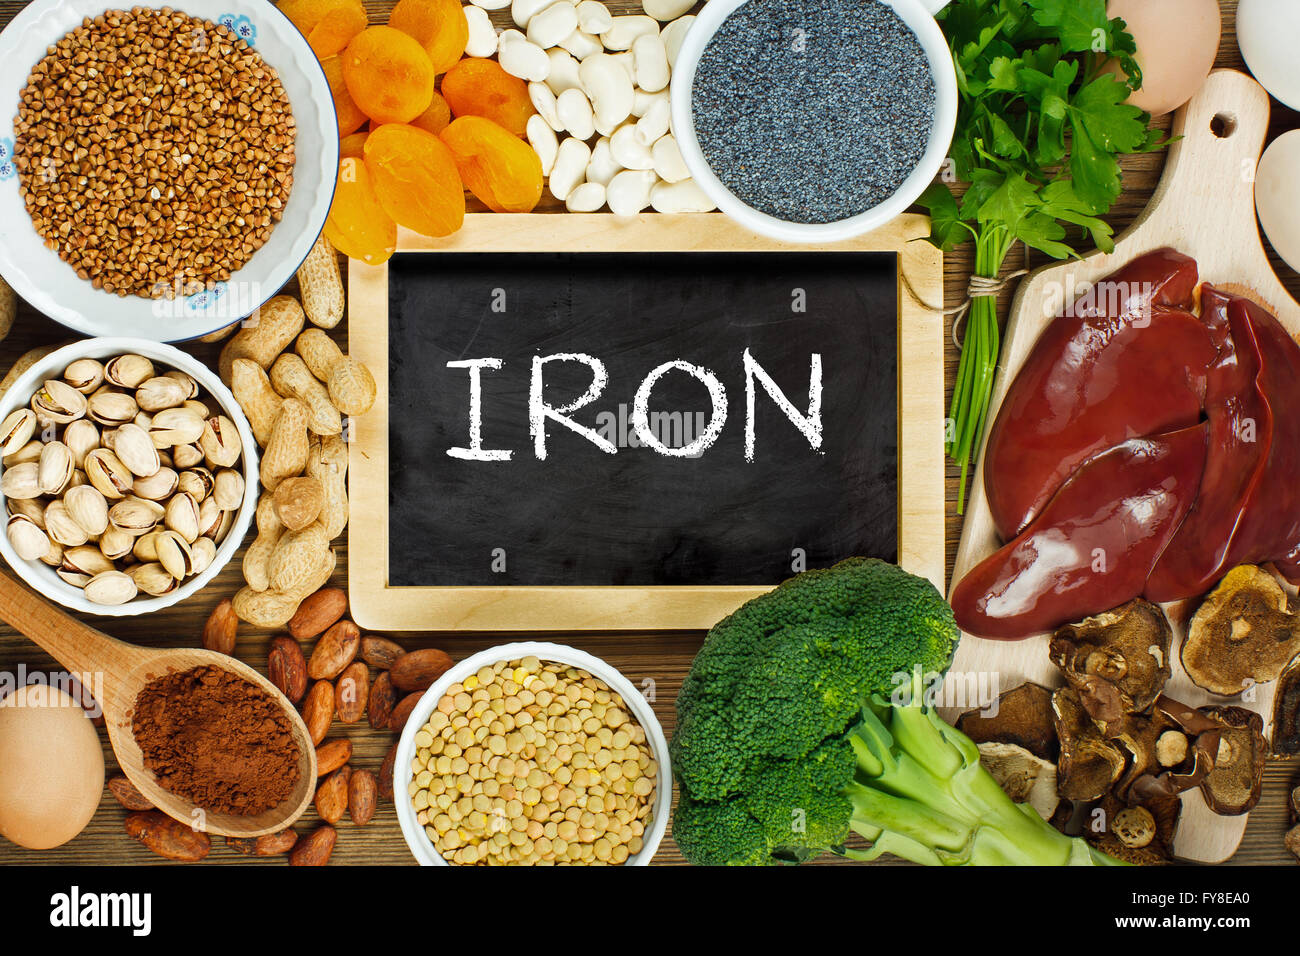 Collection iron rich foods Stock Photo - Alamy